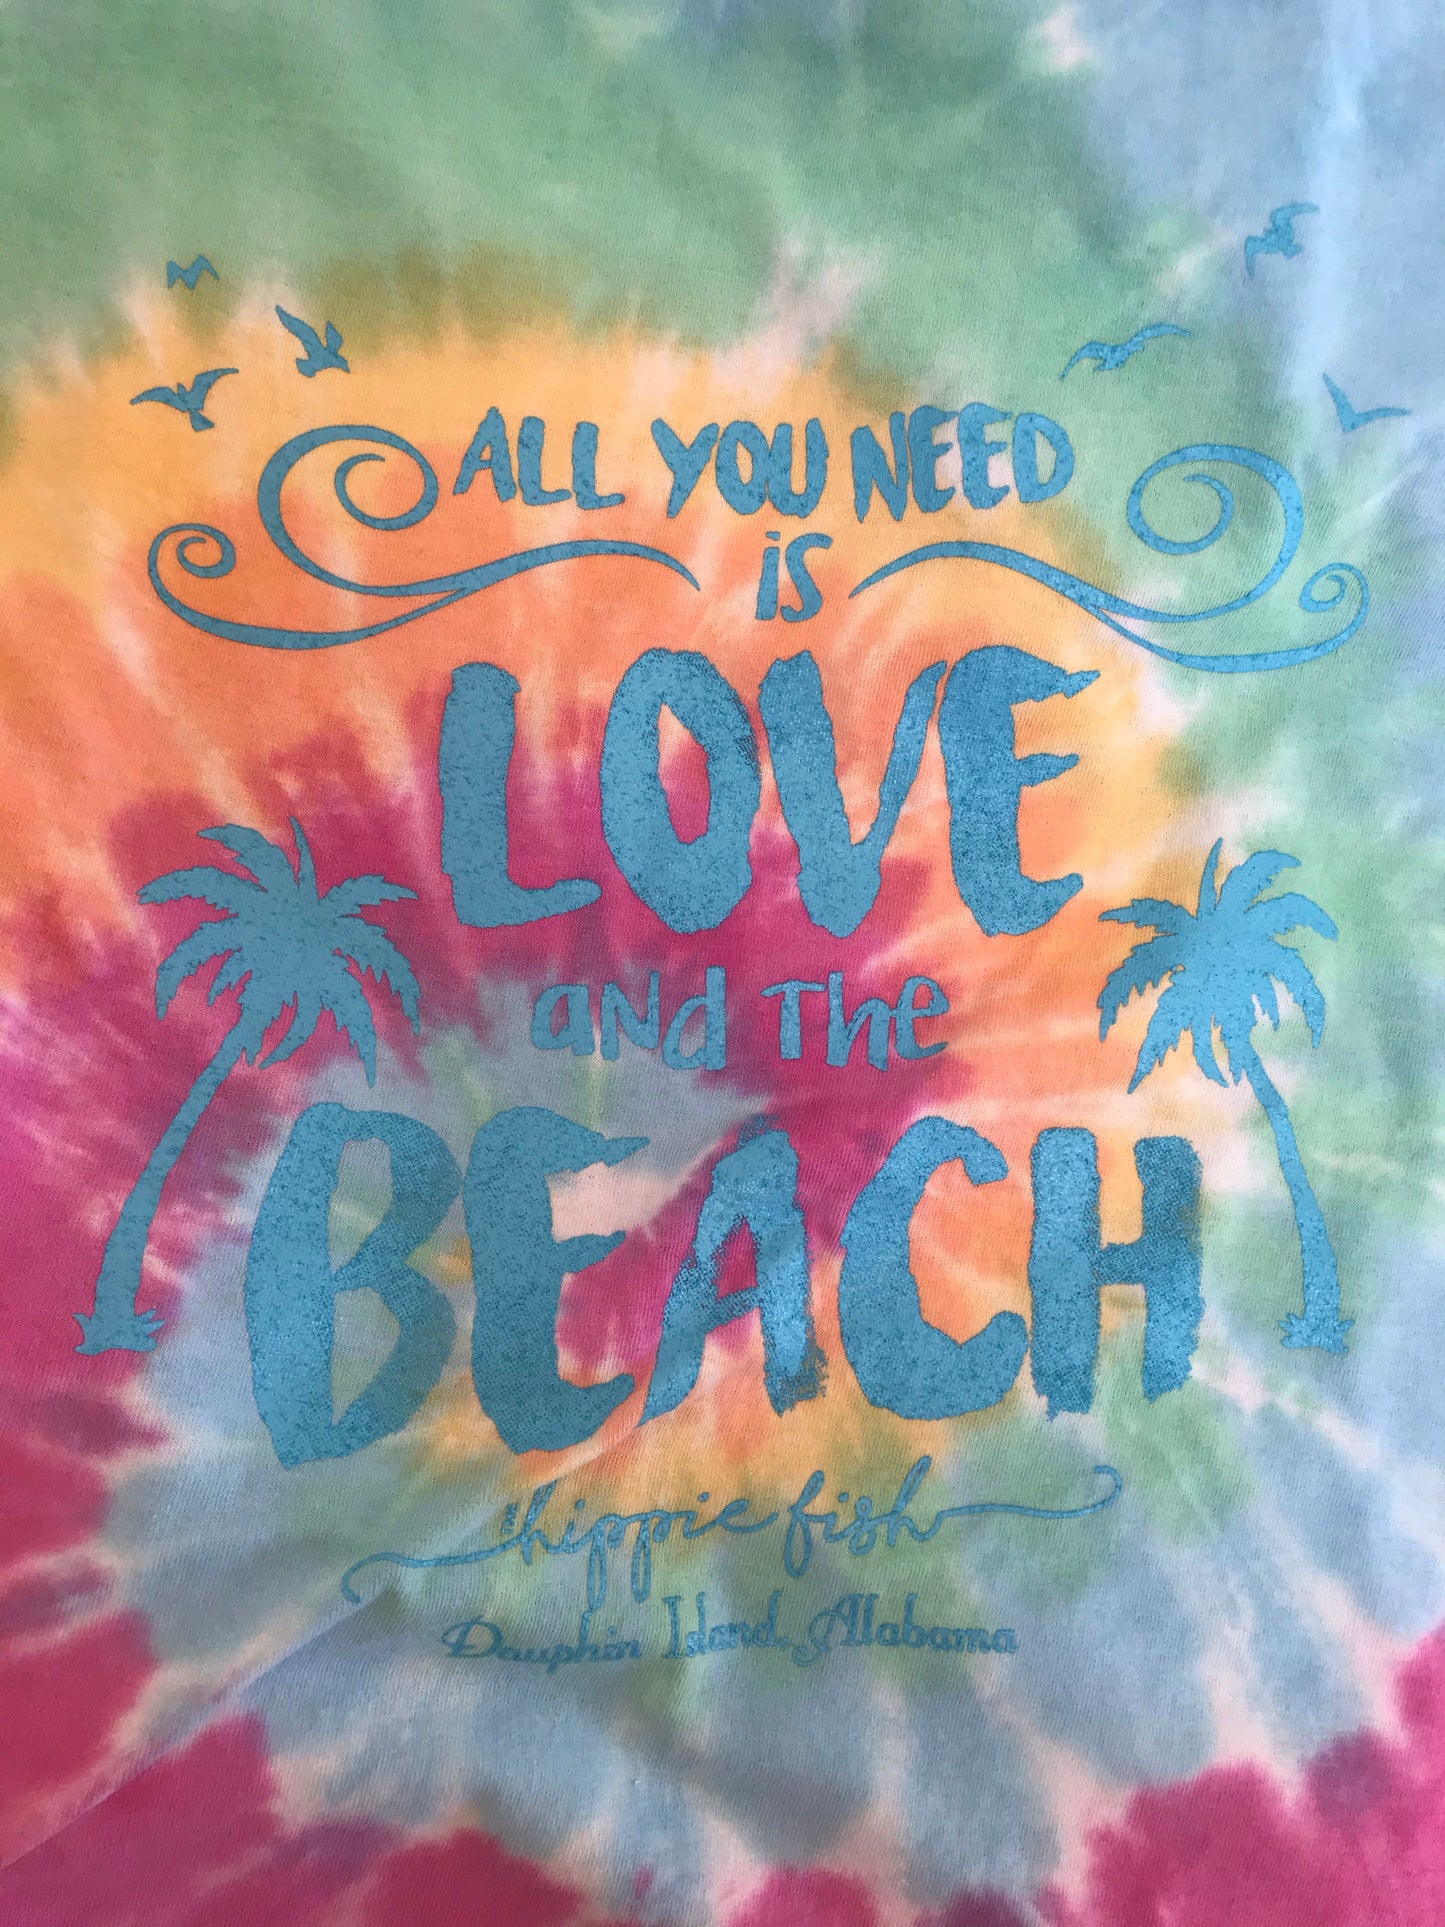 ALL YOU NEED IS LOVE AND THE BEACH SHORT SLEEVE ADULT